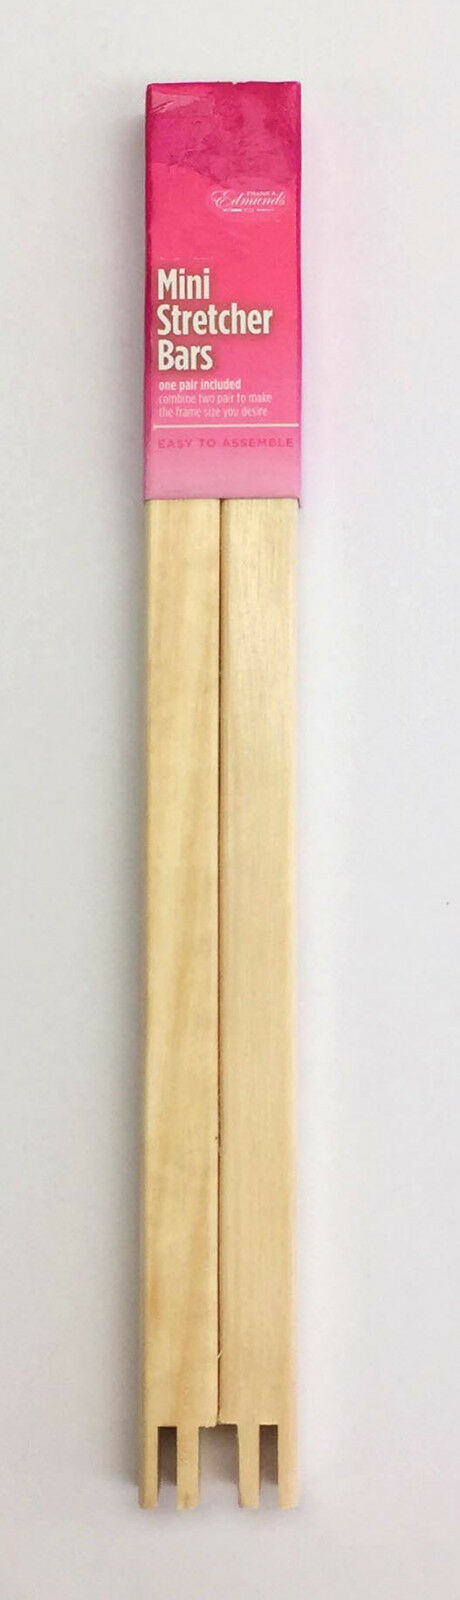 1 Pair 14" Long Mini Wood Stretcher Bar Frame Needlepoint, Quilting, Stitching